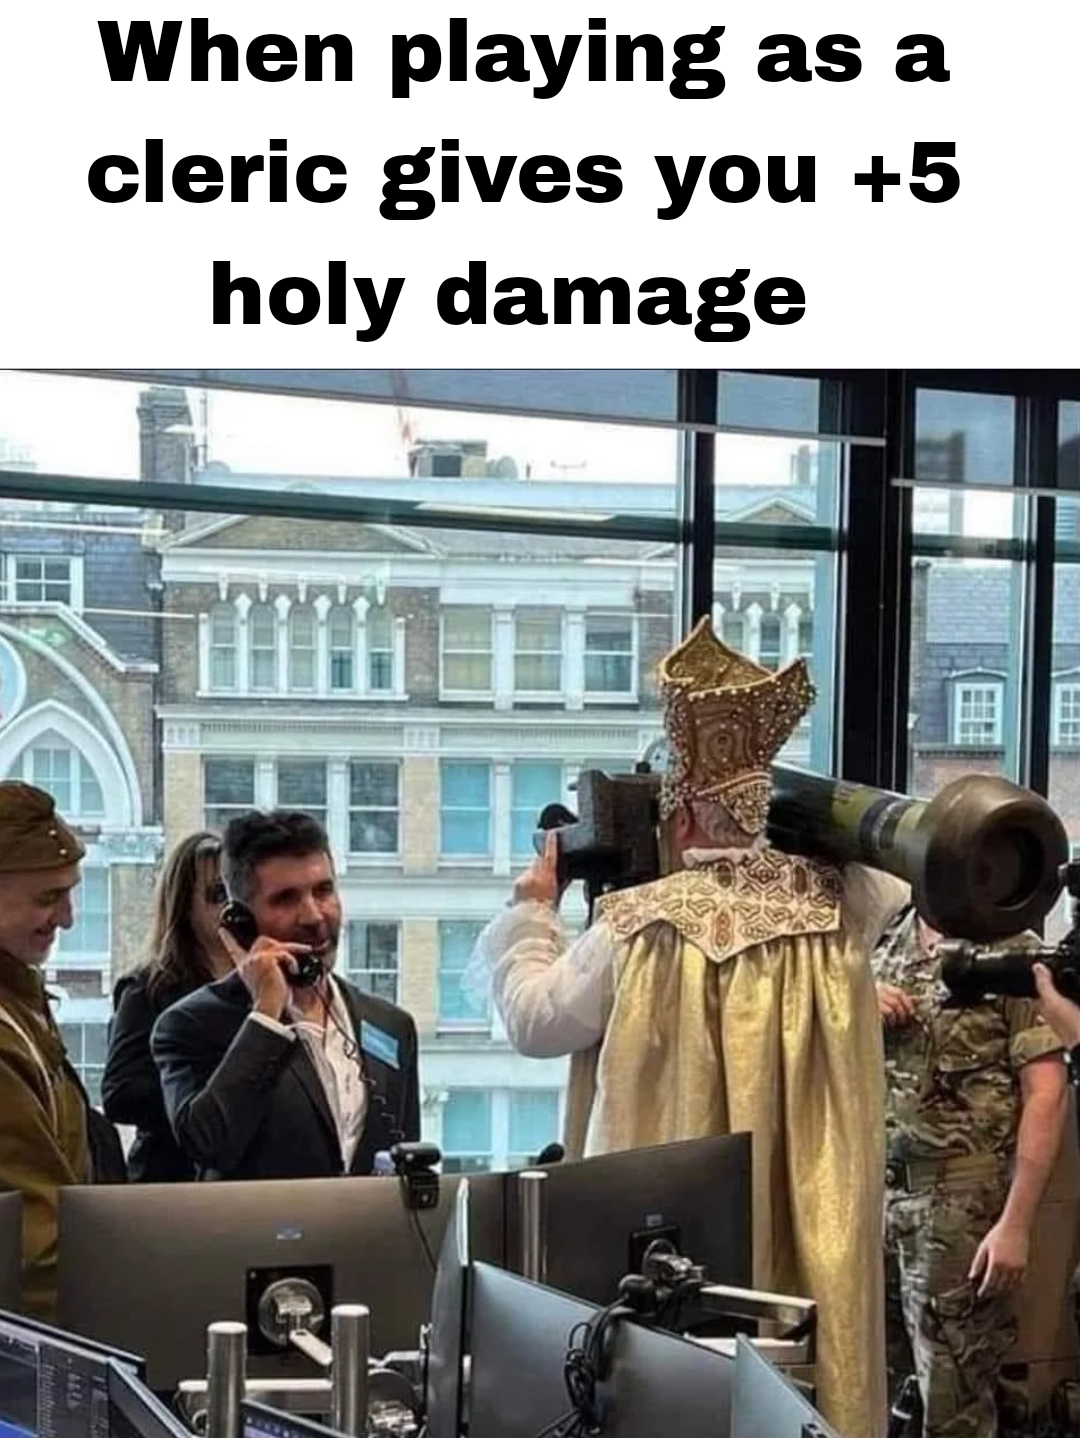 dank memes - tourism - When playing as a cleric gives you 5 holy damage 10. Nebe